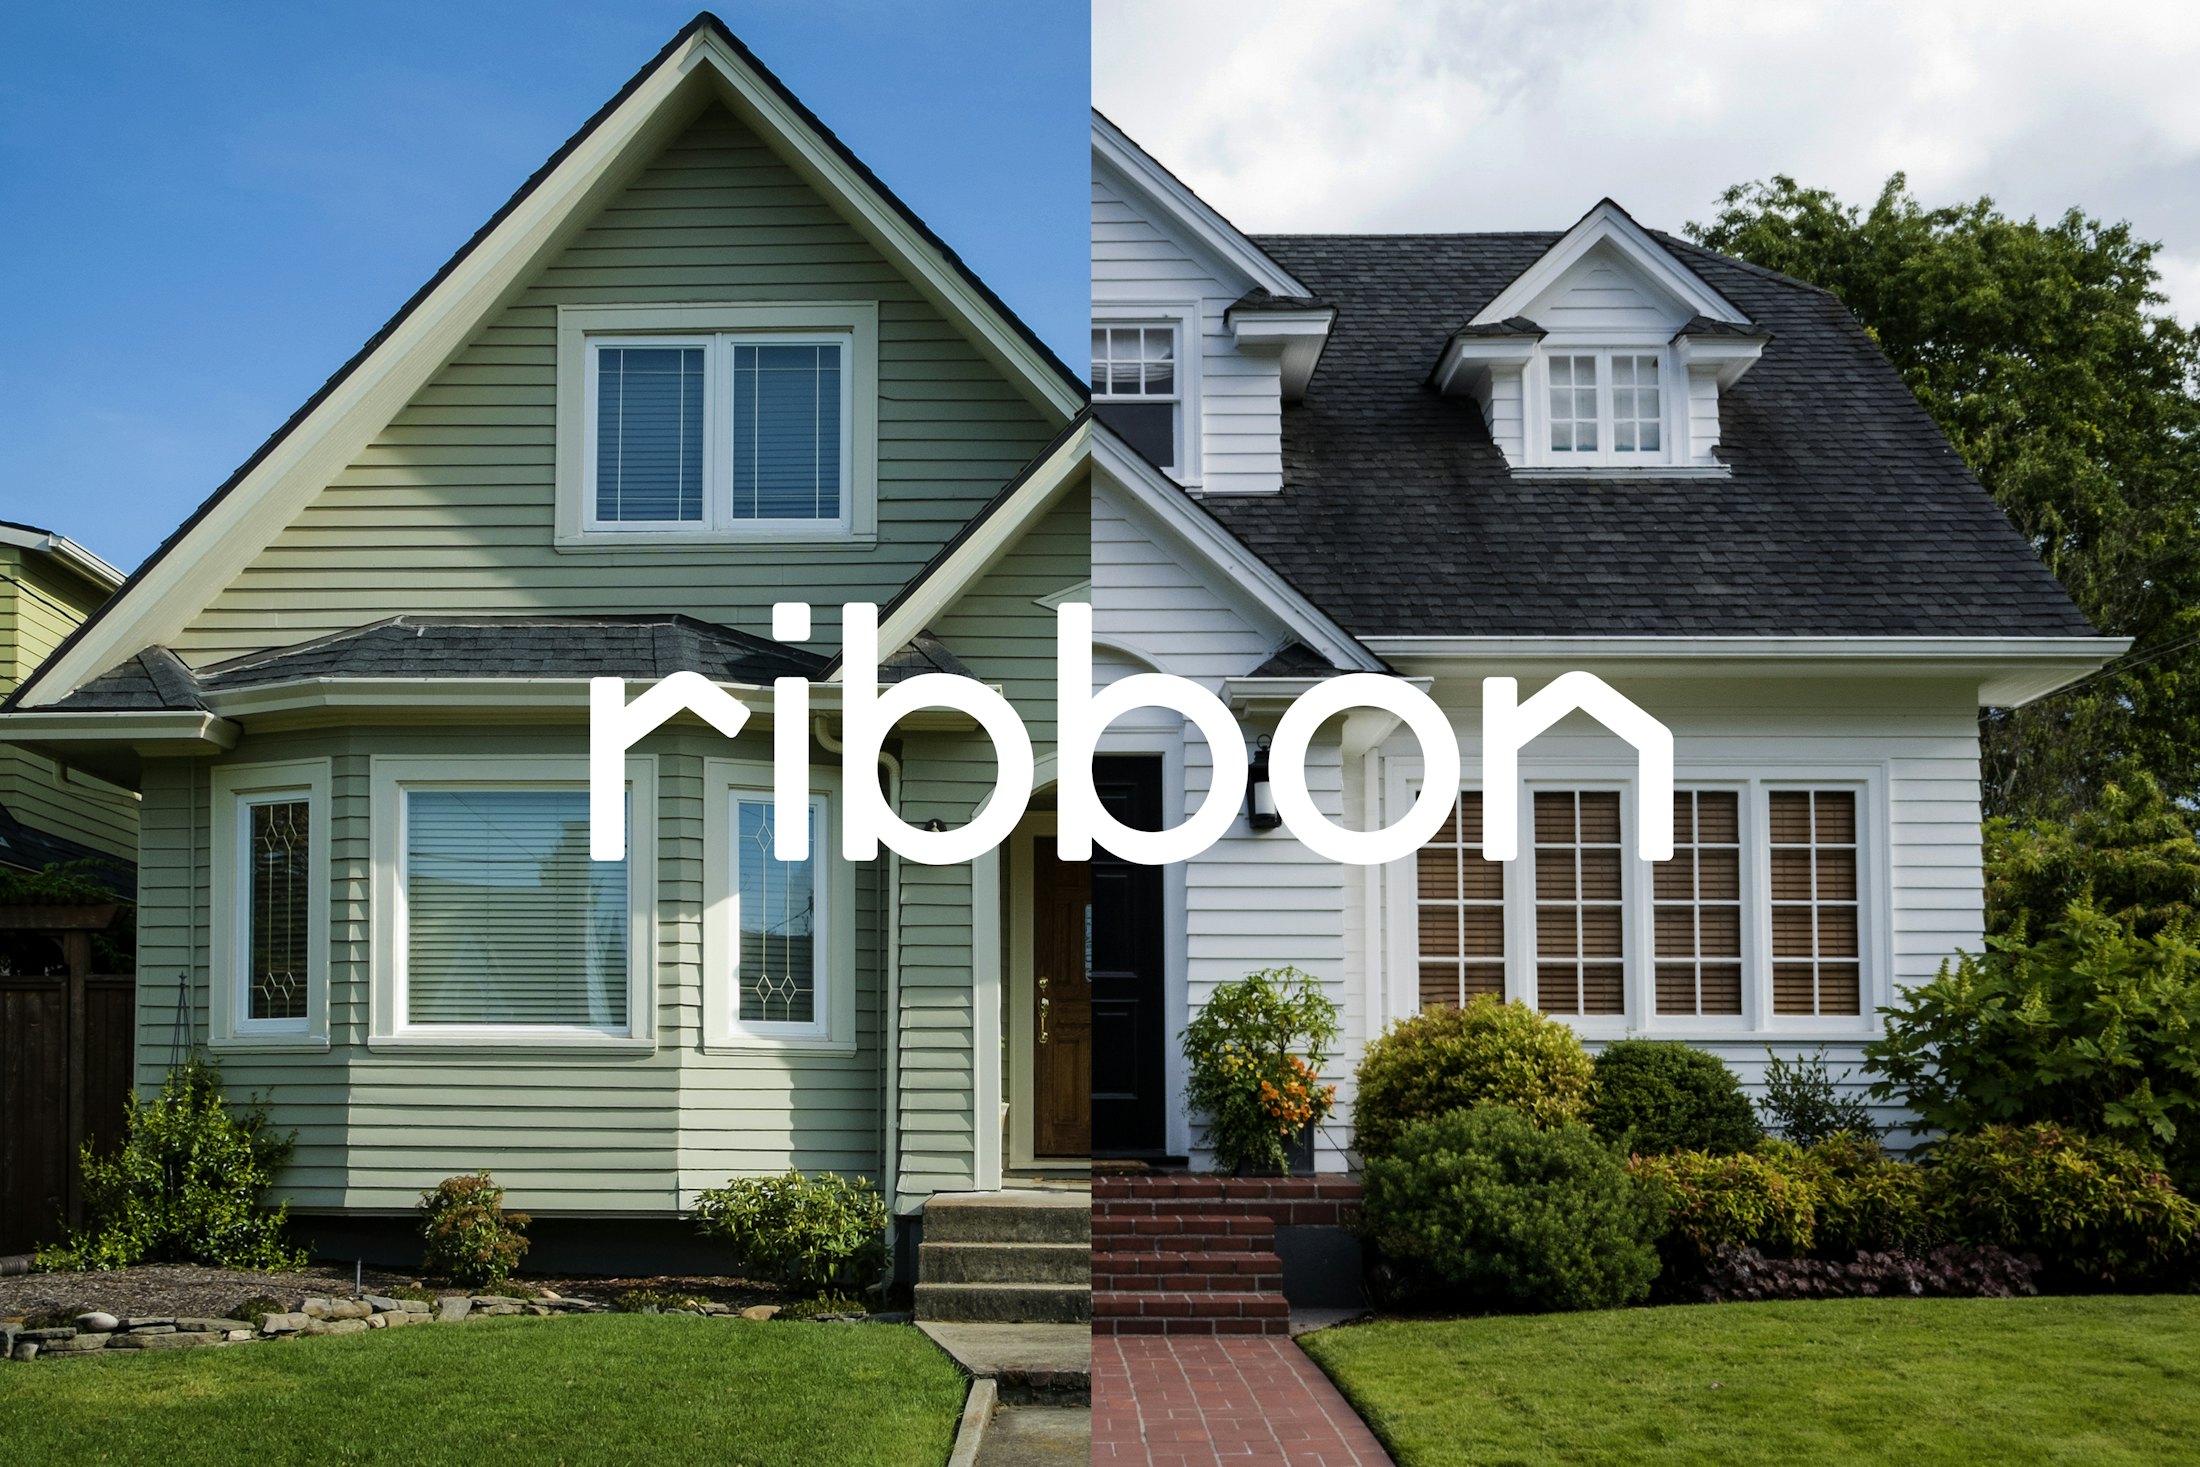 The “Ribbon” logo set on top of photos of houses